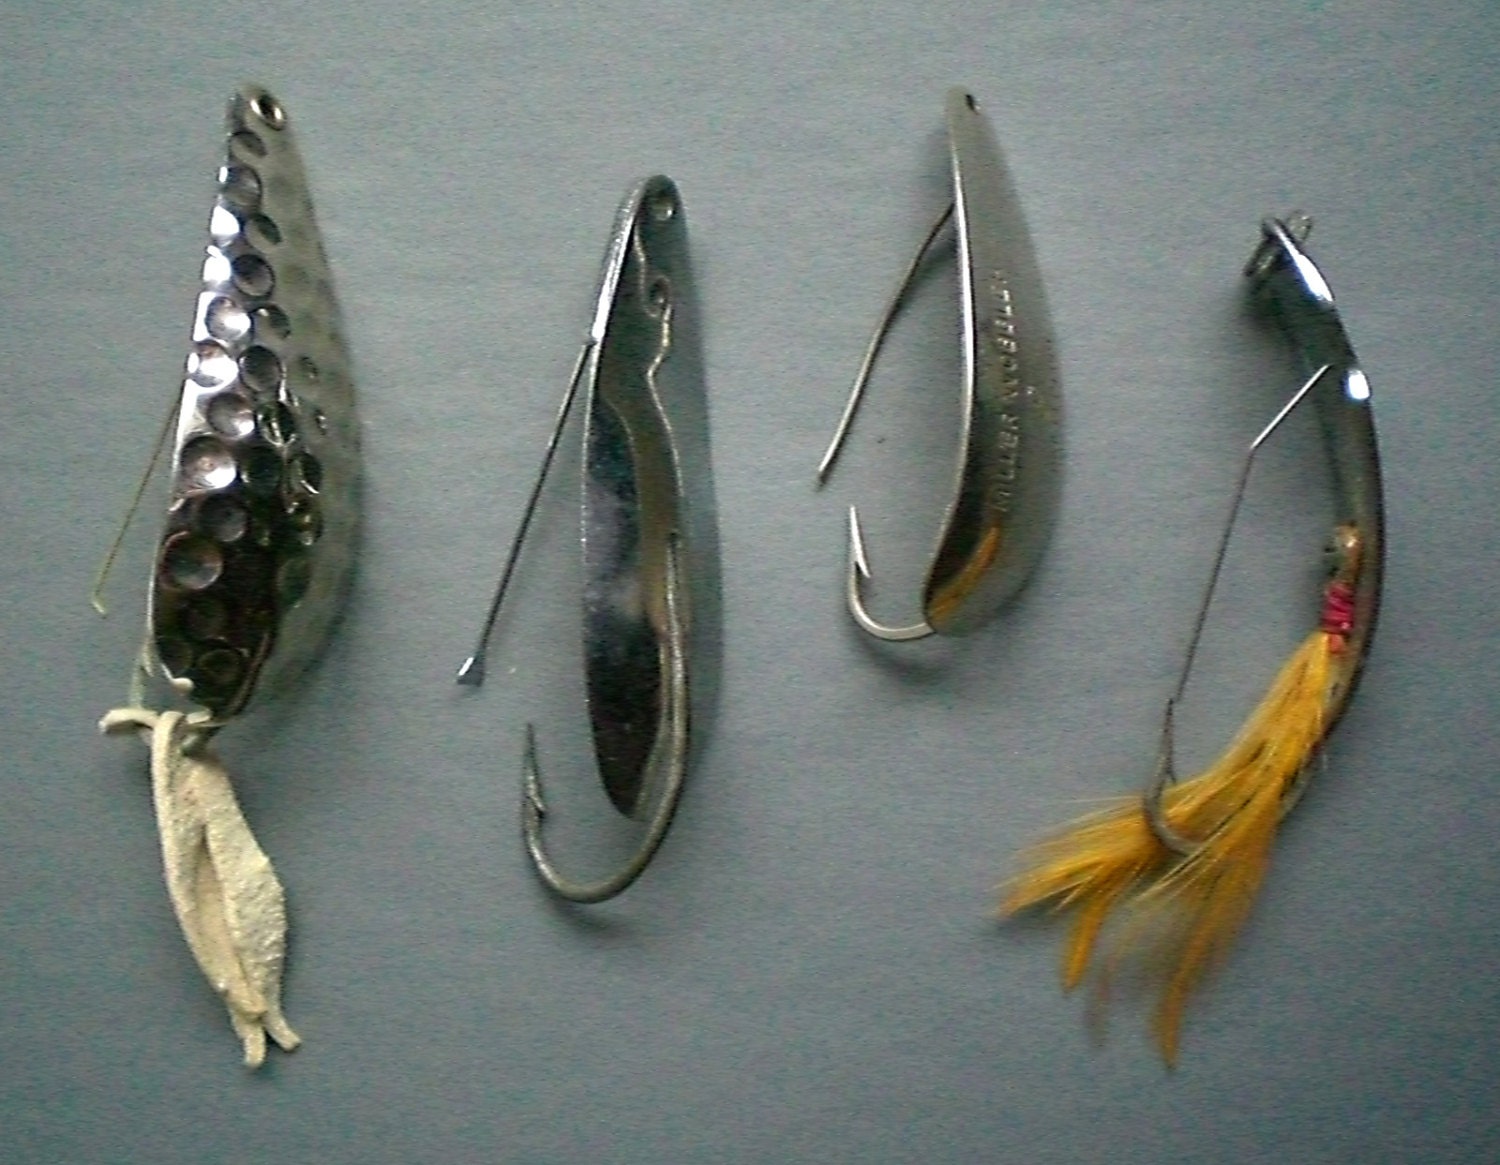 Photos of the Most Valuable Antique Fishing Lures - Wide Open